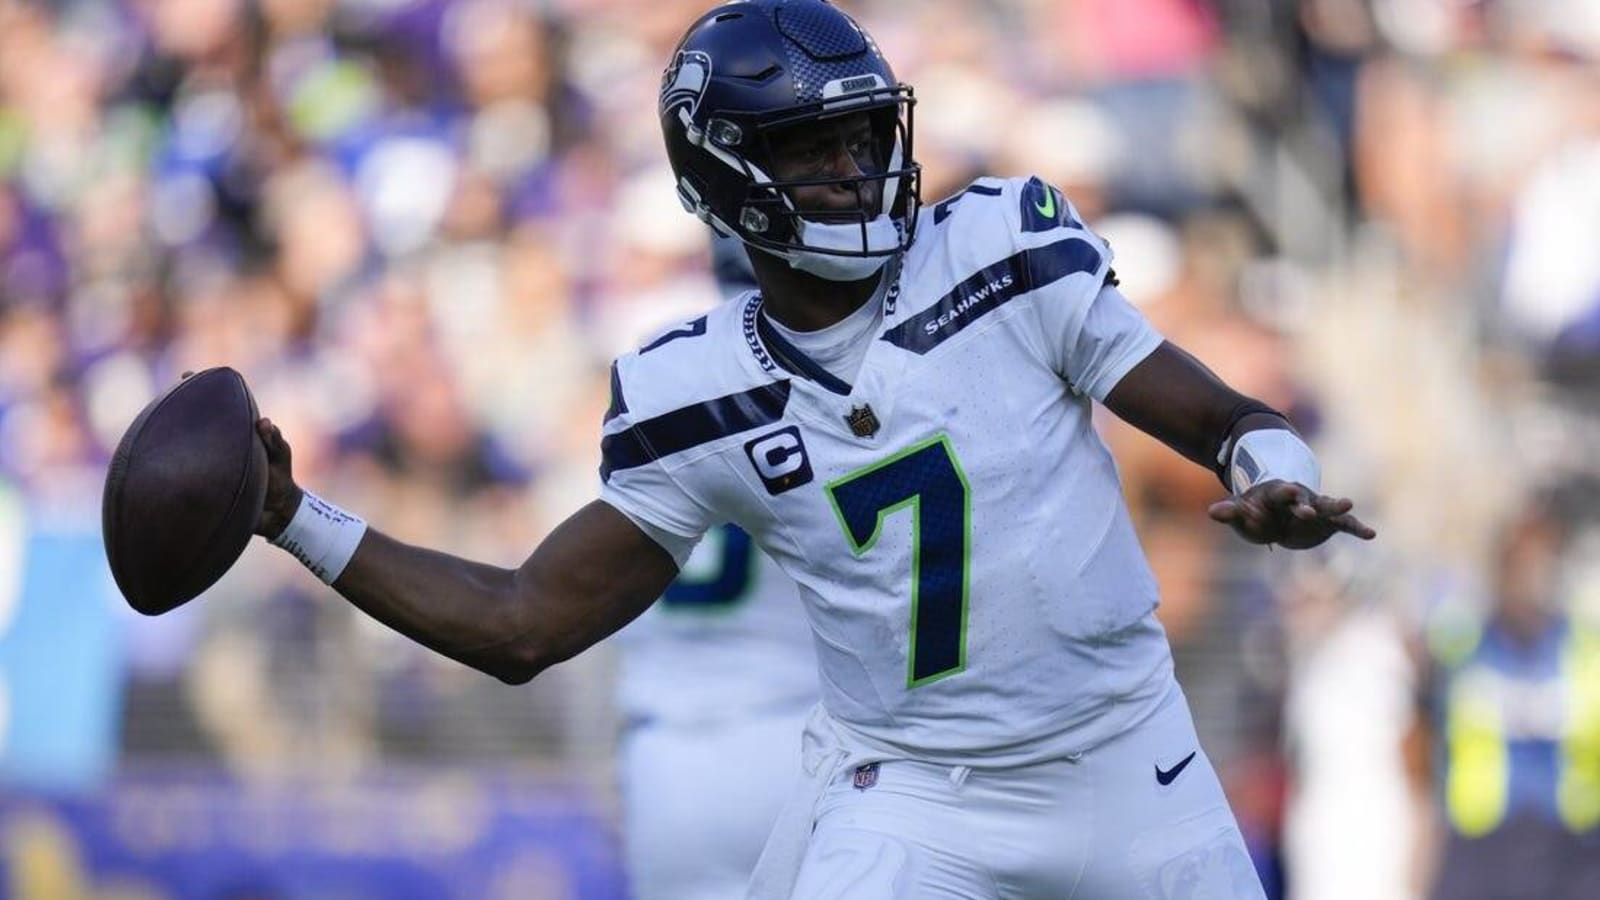 Seahawks aim to get back on track in clash vs. Commanders